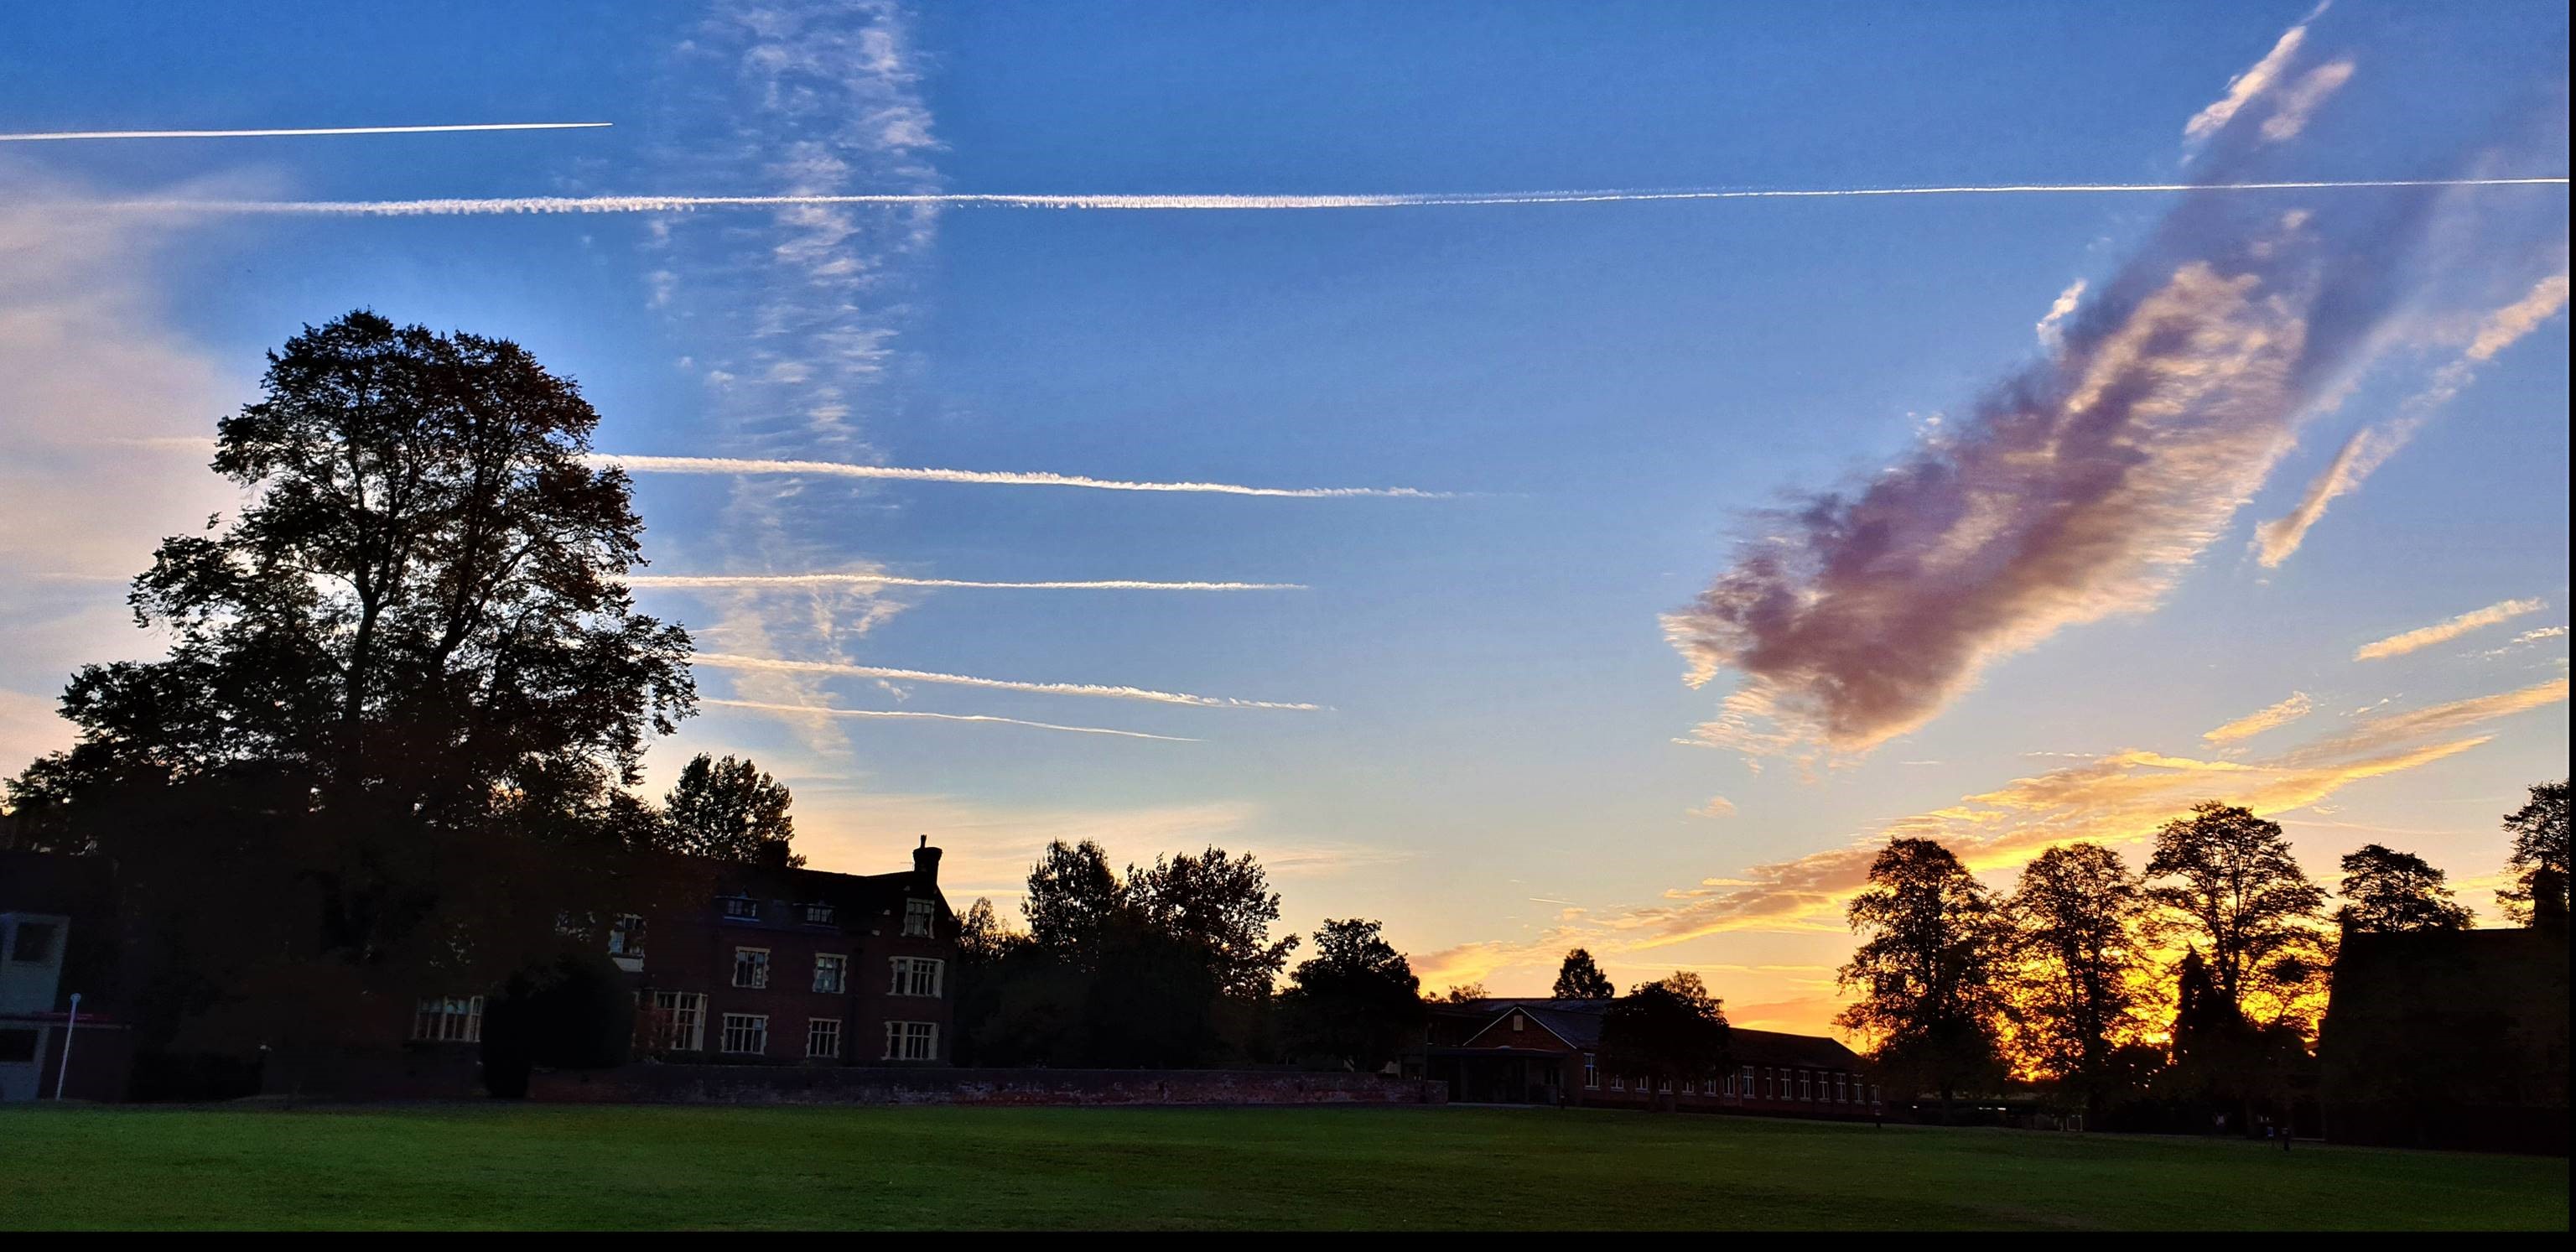 Perfect lines in the sky above Bromsgrove School